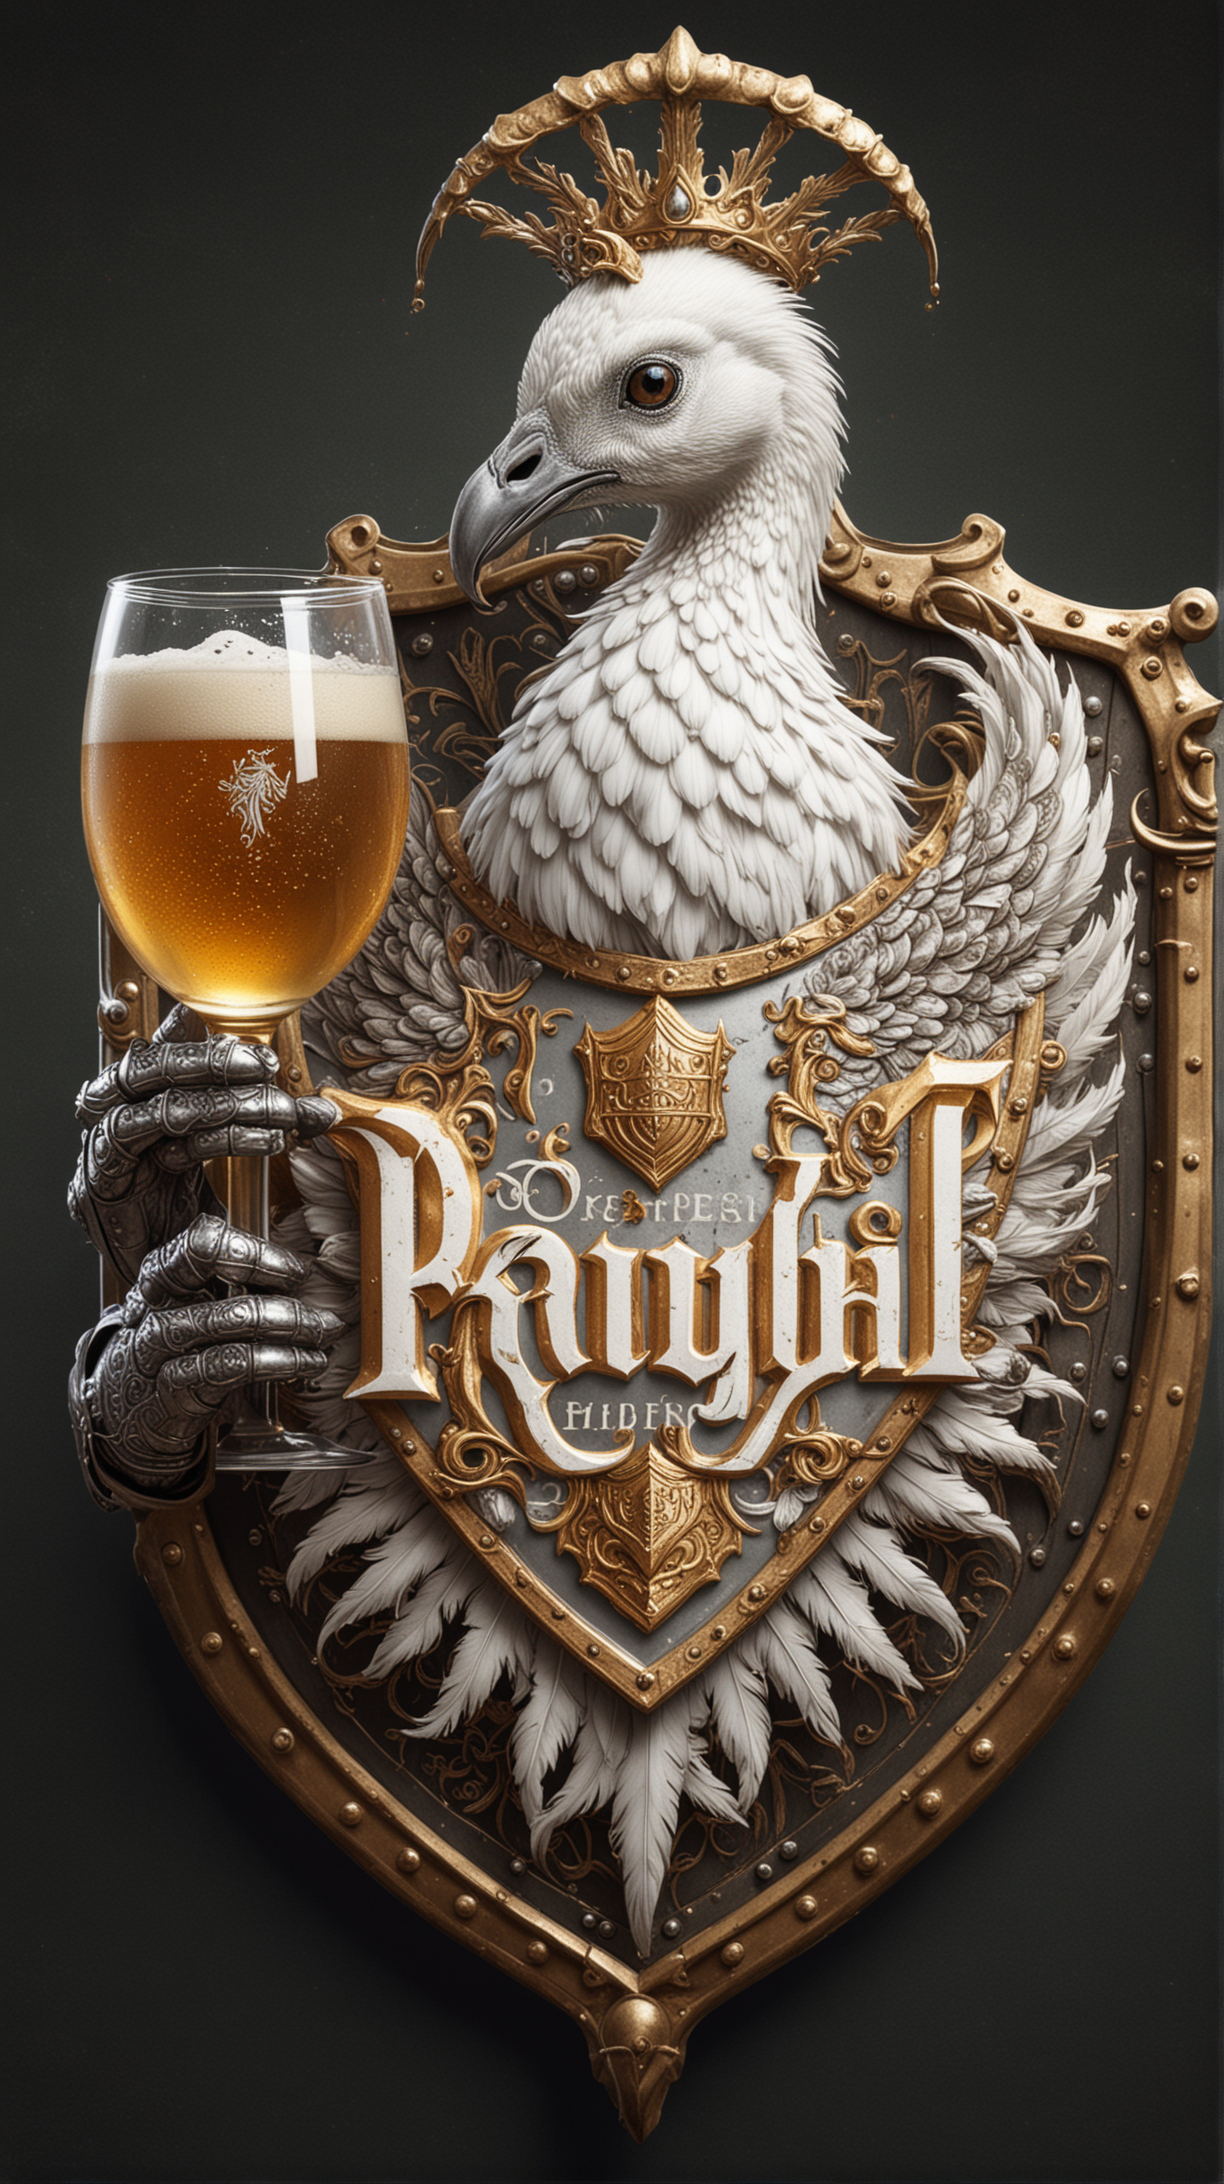 make me an logo from a white peacock dressed as a knight drinking beer presented on a knight's shield